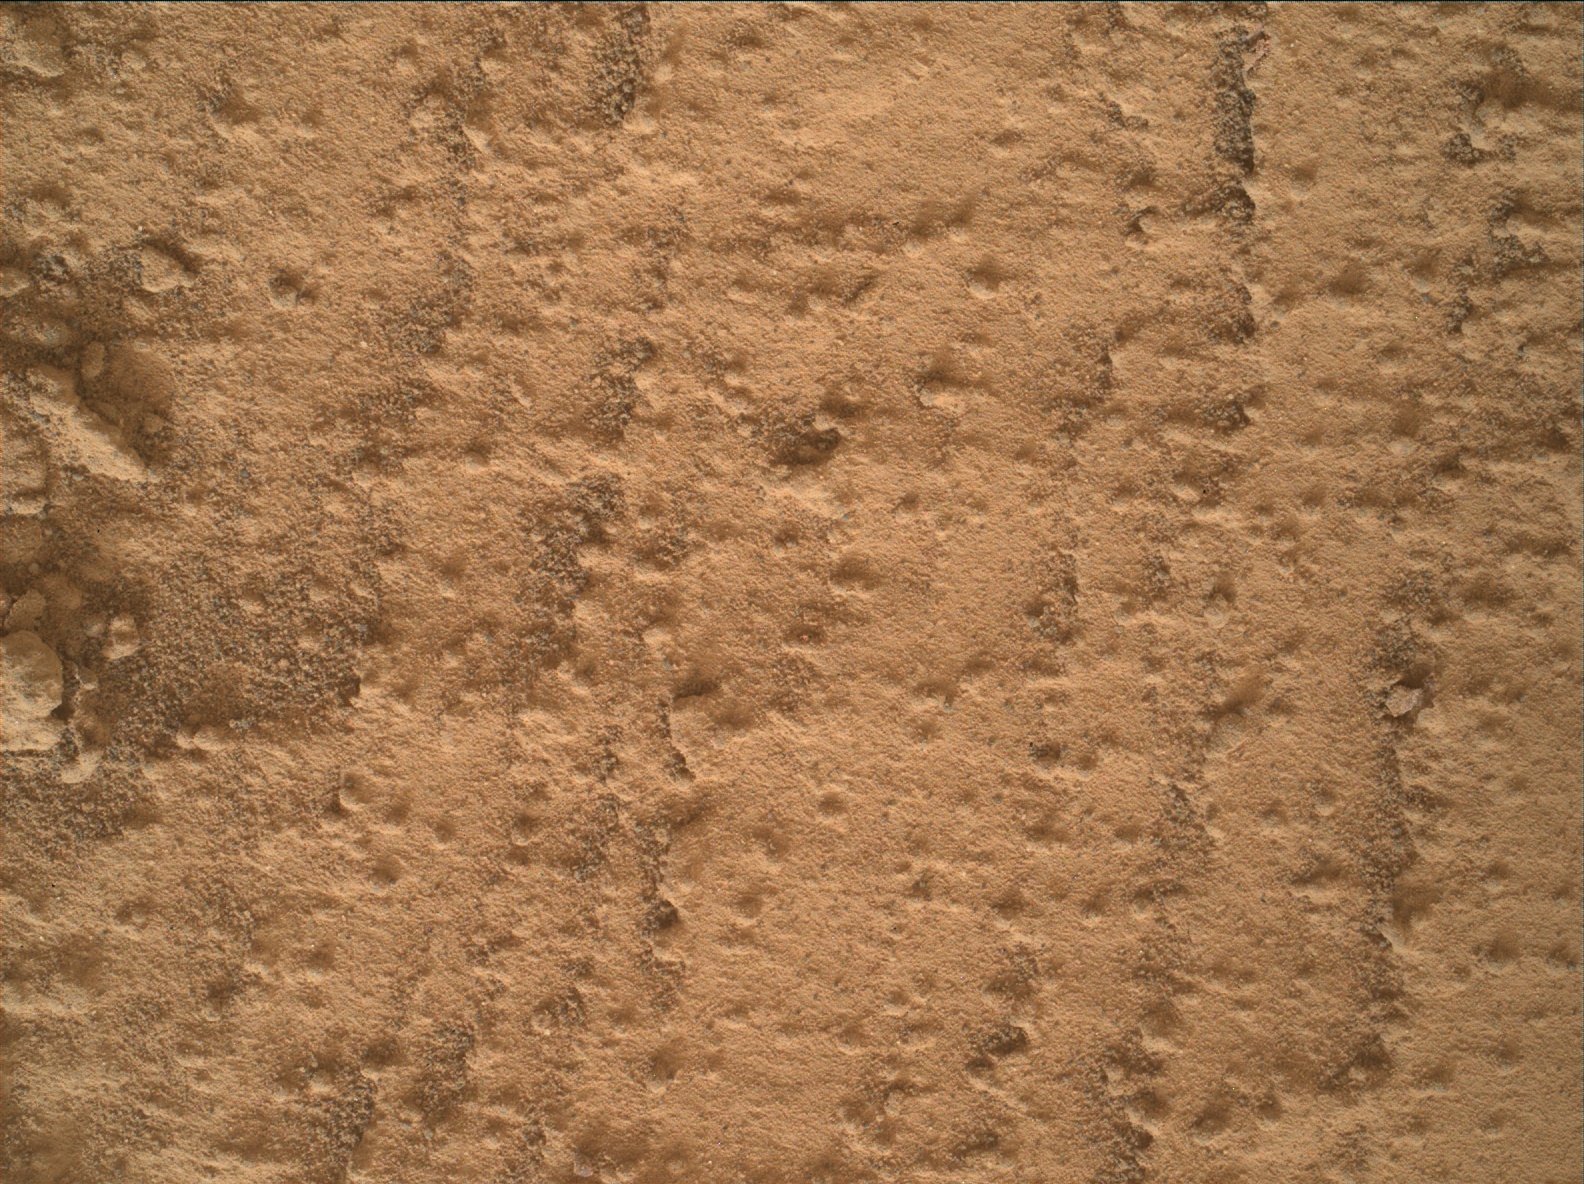 Nasa's Mars rover Curiosity acquired this image using its Mars Hand Lens Imager (MAHLI) on Sol 3474